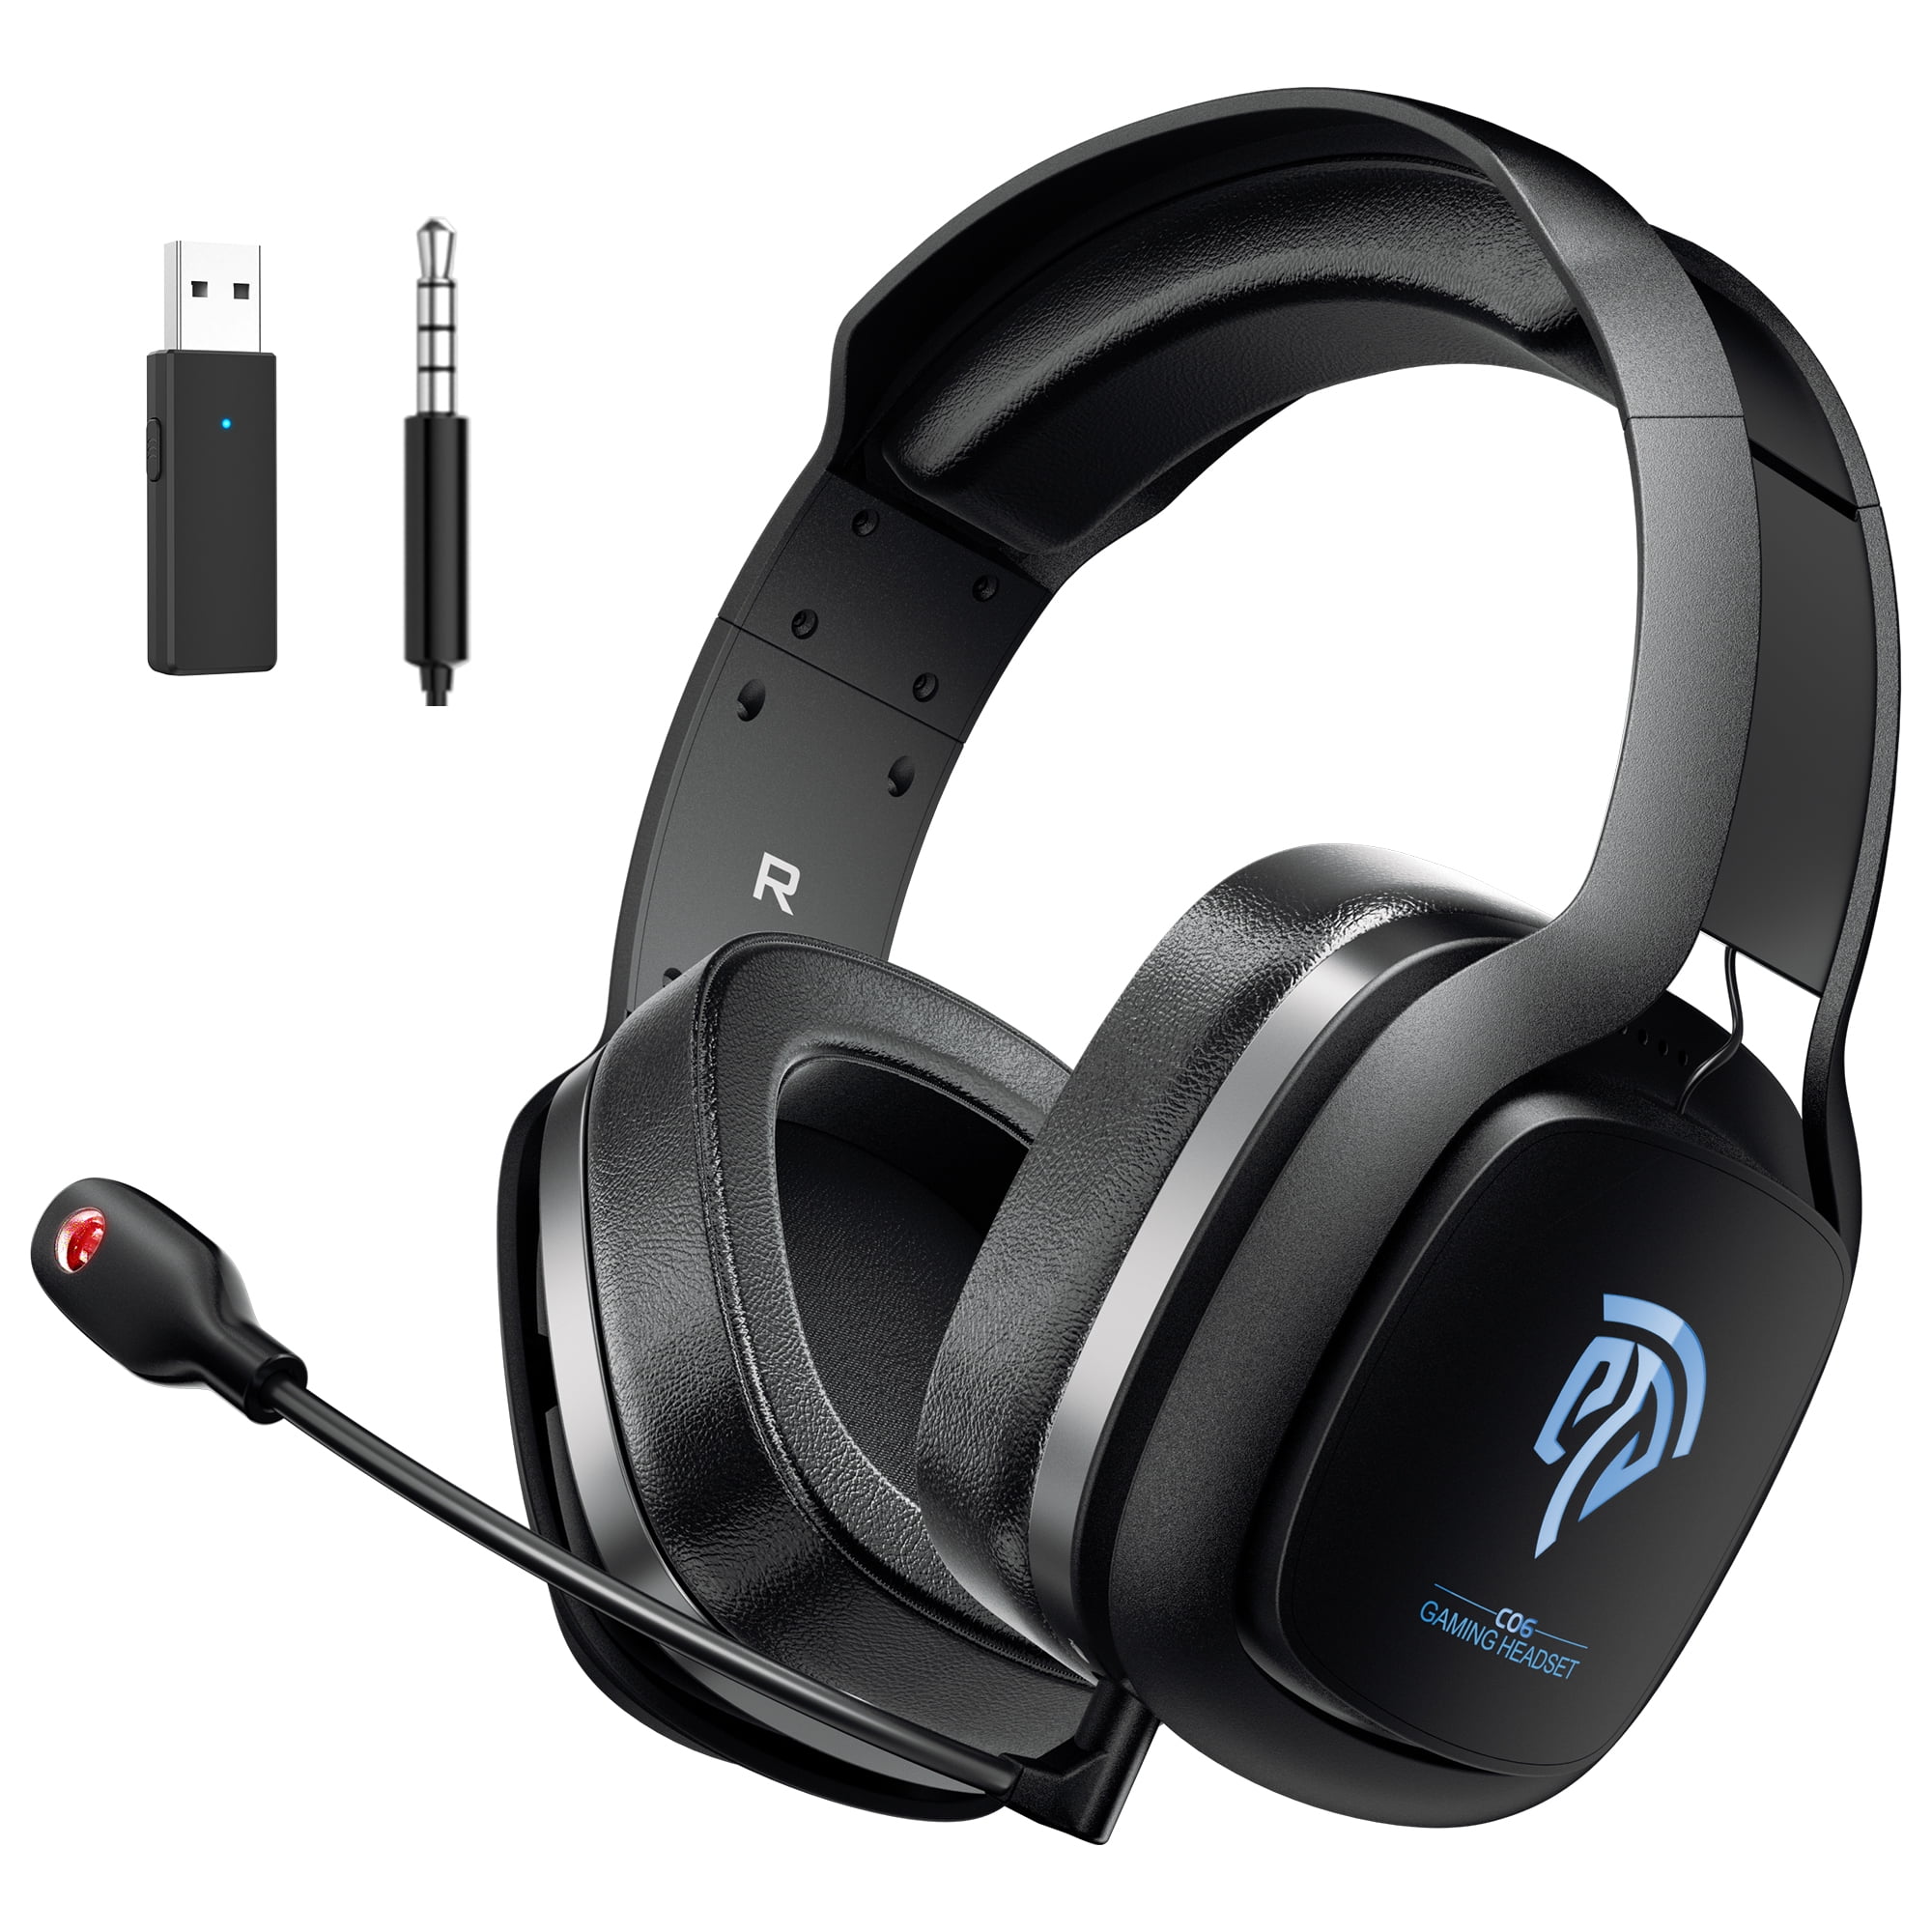 benzine maandag kleinhandel EasySMX C06W 2.4GHz Wireless Gaming Headset for PC, PS4, PS5, MAC, Nintendo  Switch, 3.5mm Wired Mode for Xbox One, Bluetooth Gaming Headphones with  Detachable Noise Canceling Microphone, Black - Walmart.com